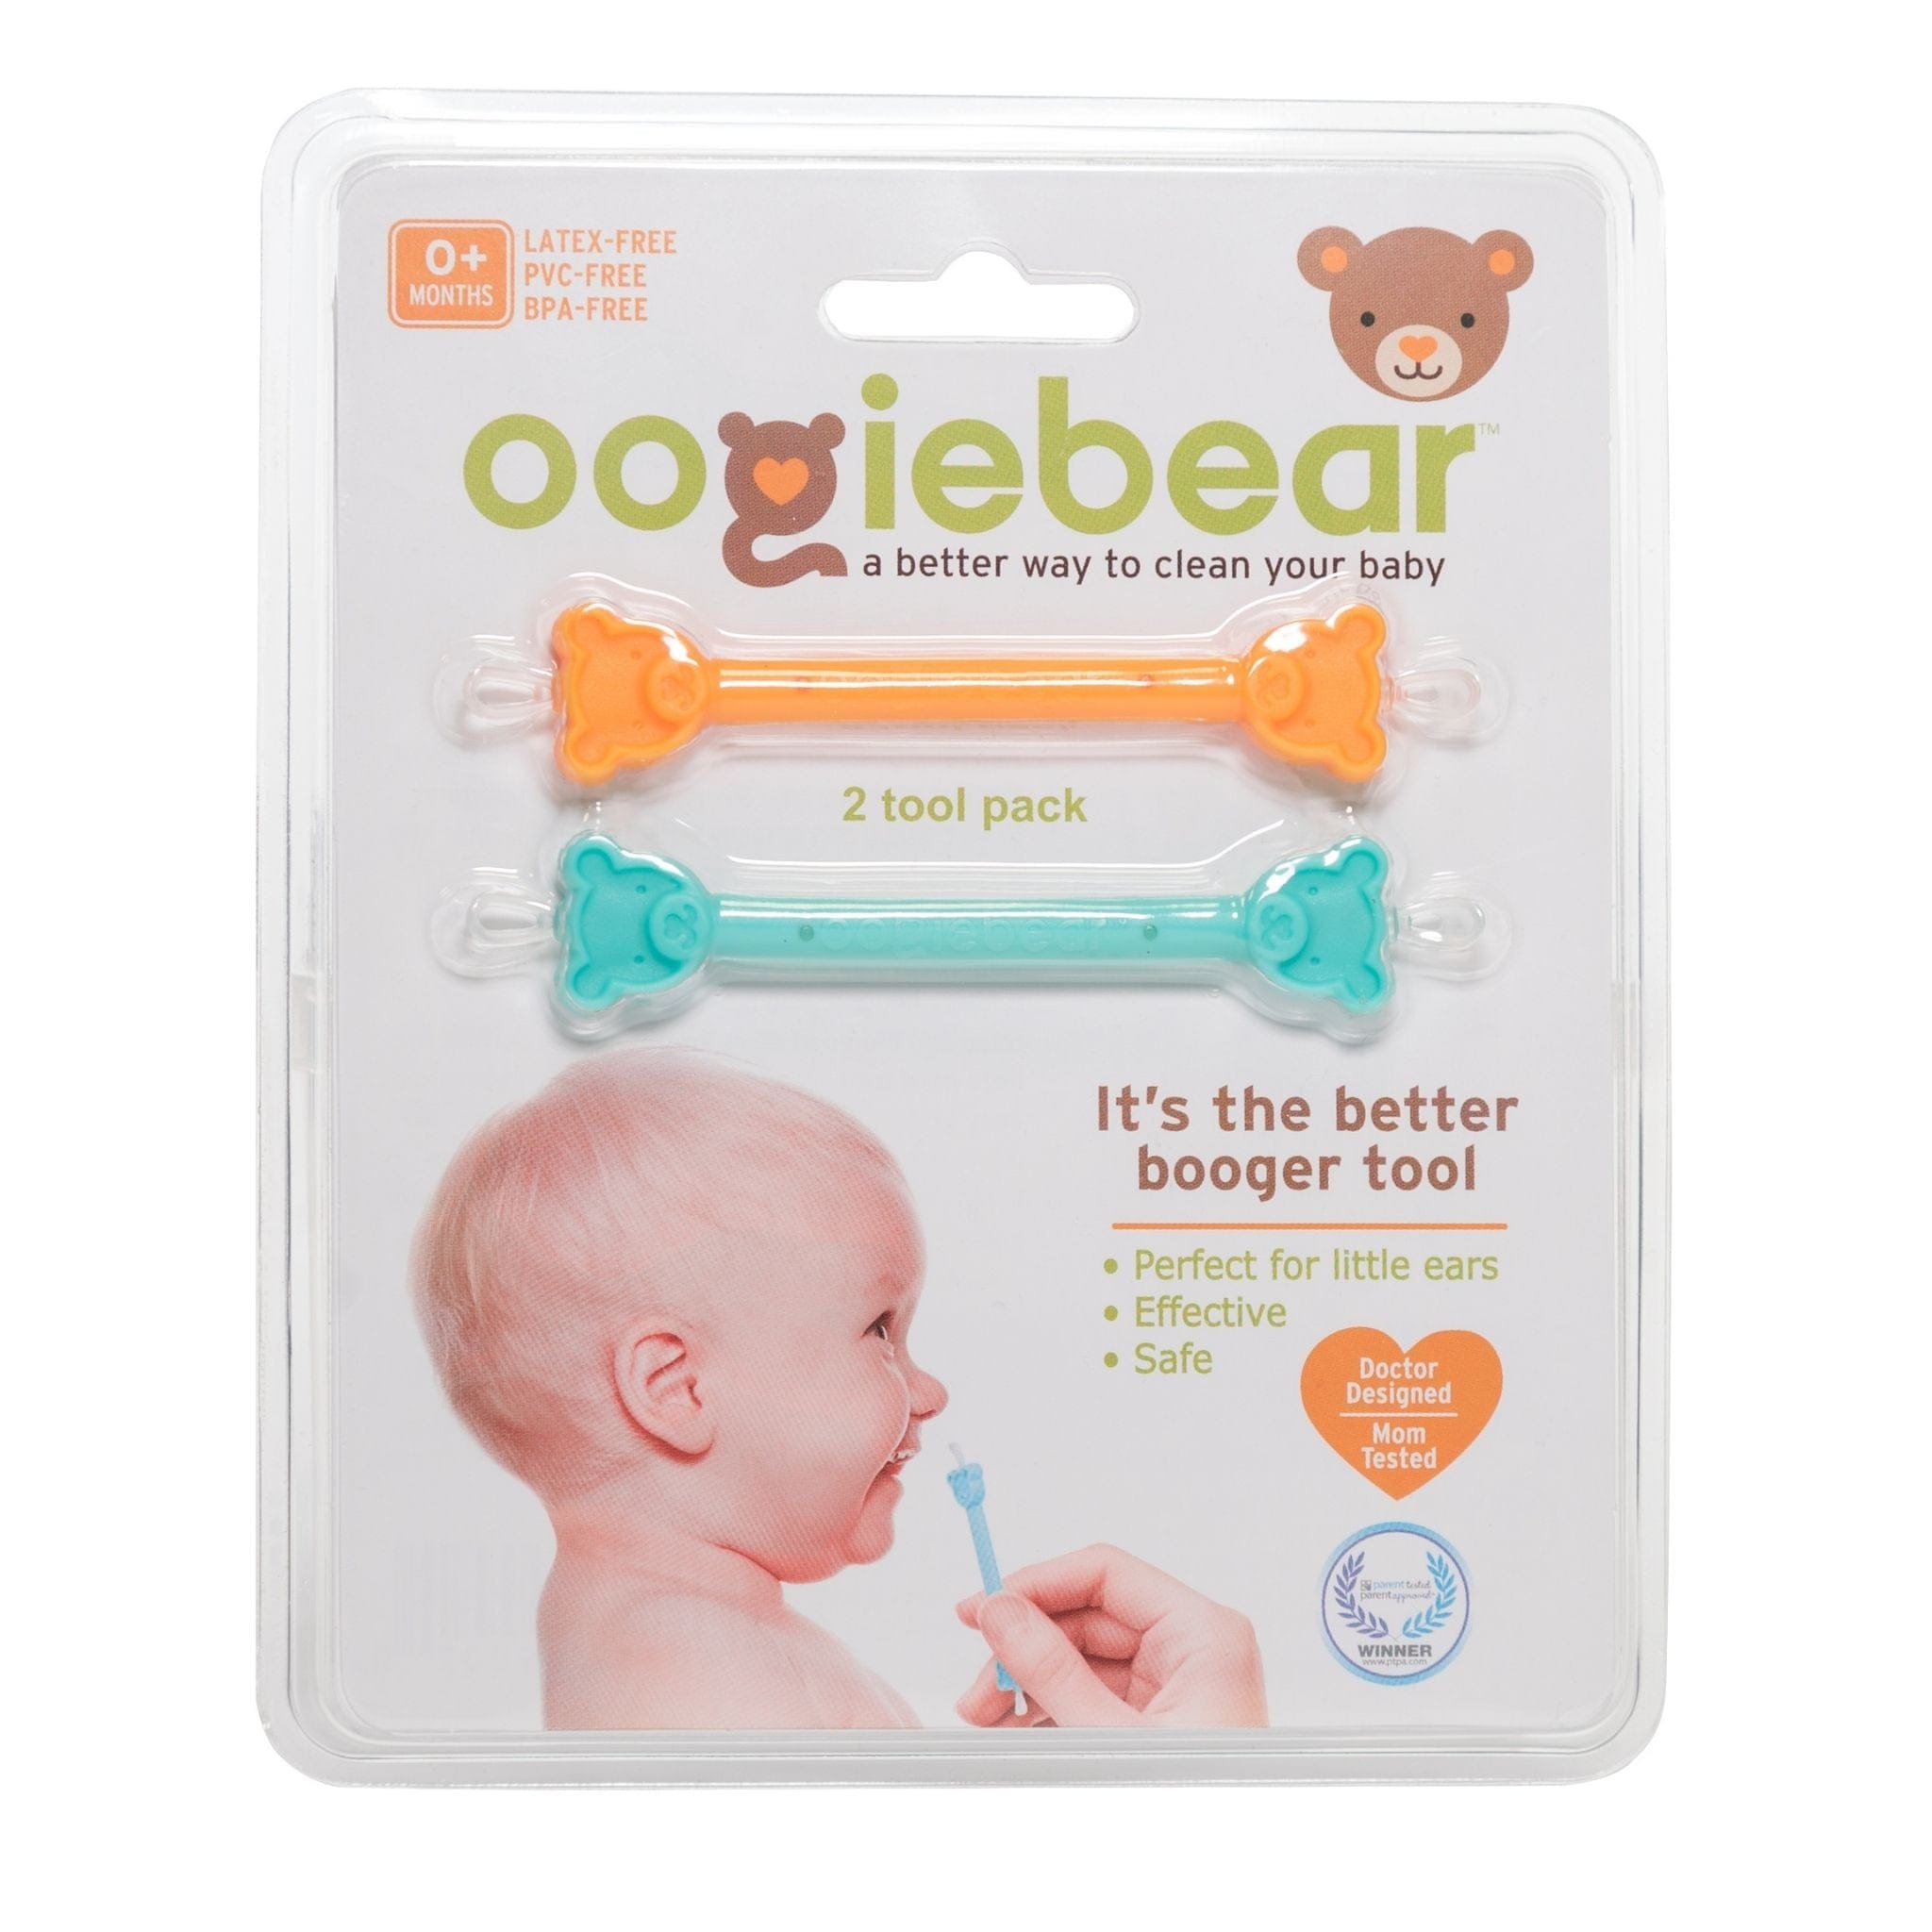  oogiebear - Nose and Ear Gadget. Safe, Easy Nasal Booger and  Ear Cleaner for Newborns and Infants. Dual Earwax and Snot Remover - 2 Pack  with Case - Orange and Seafoam : Baby